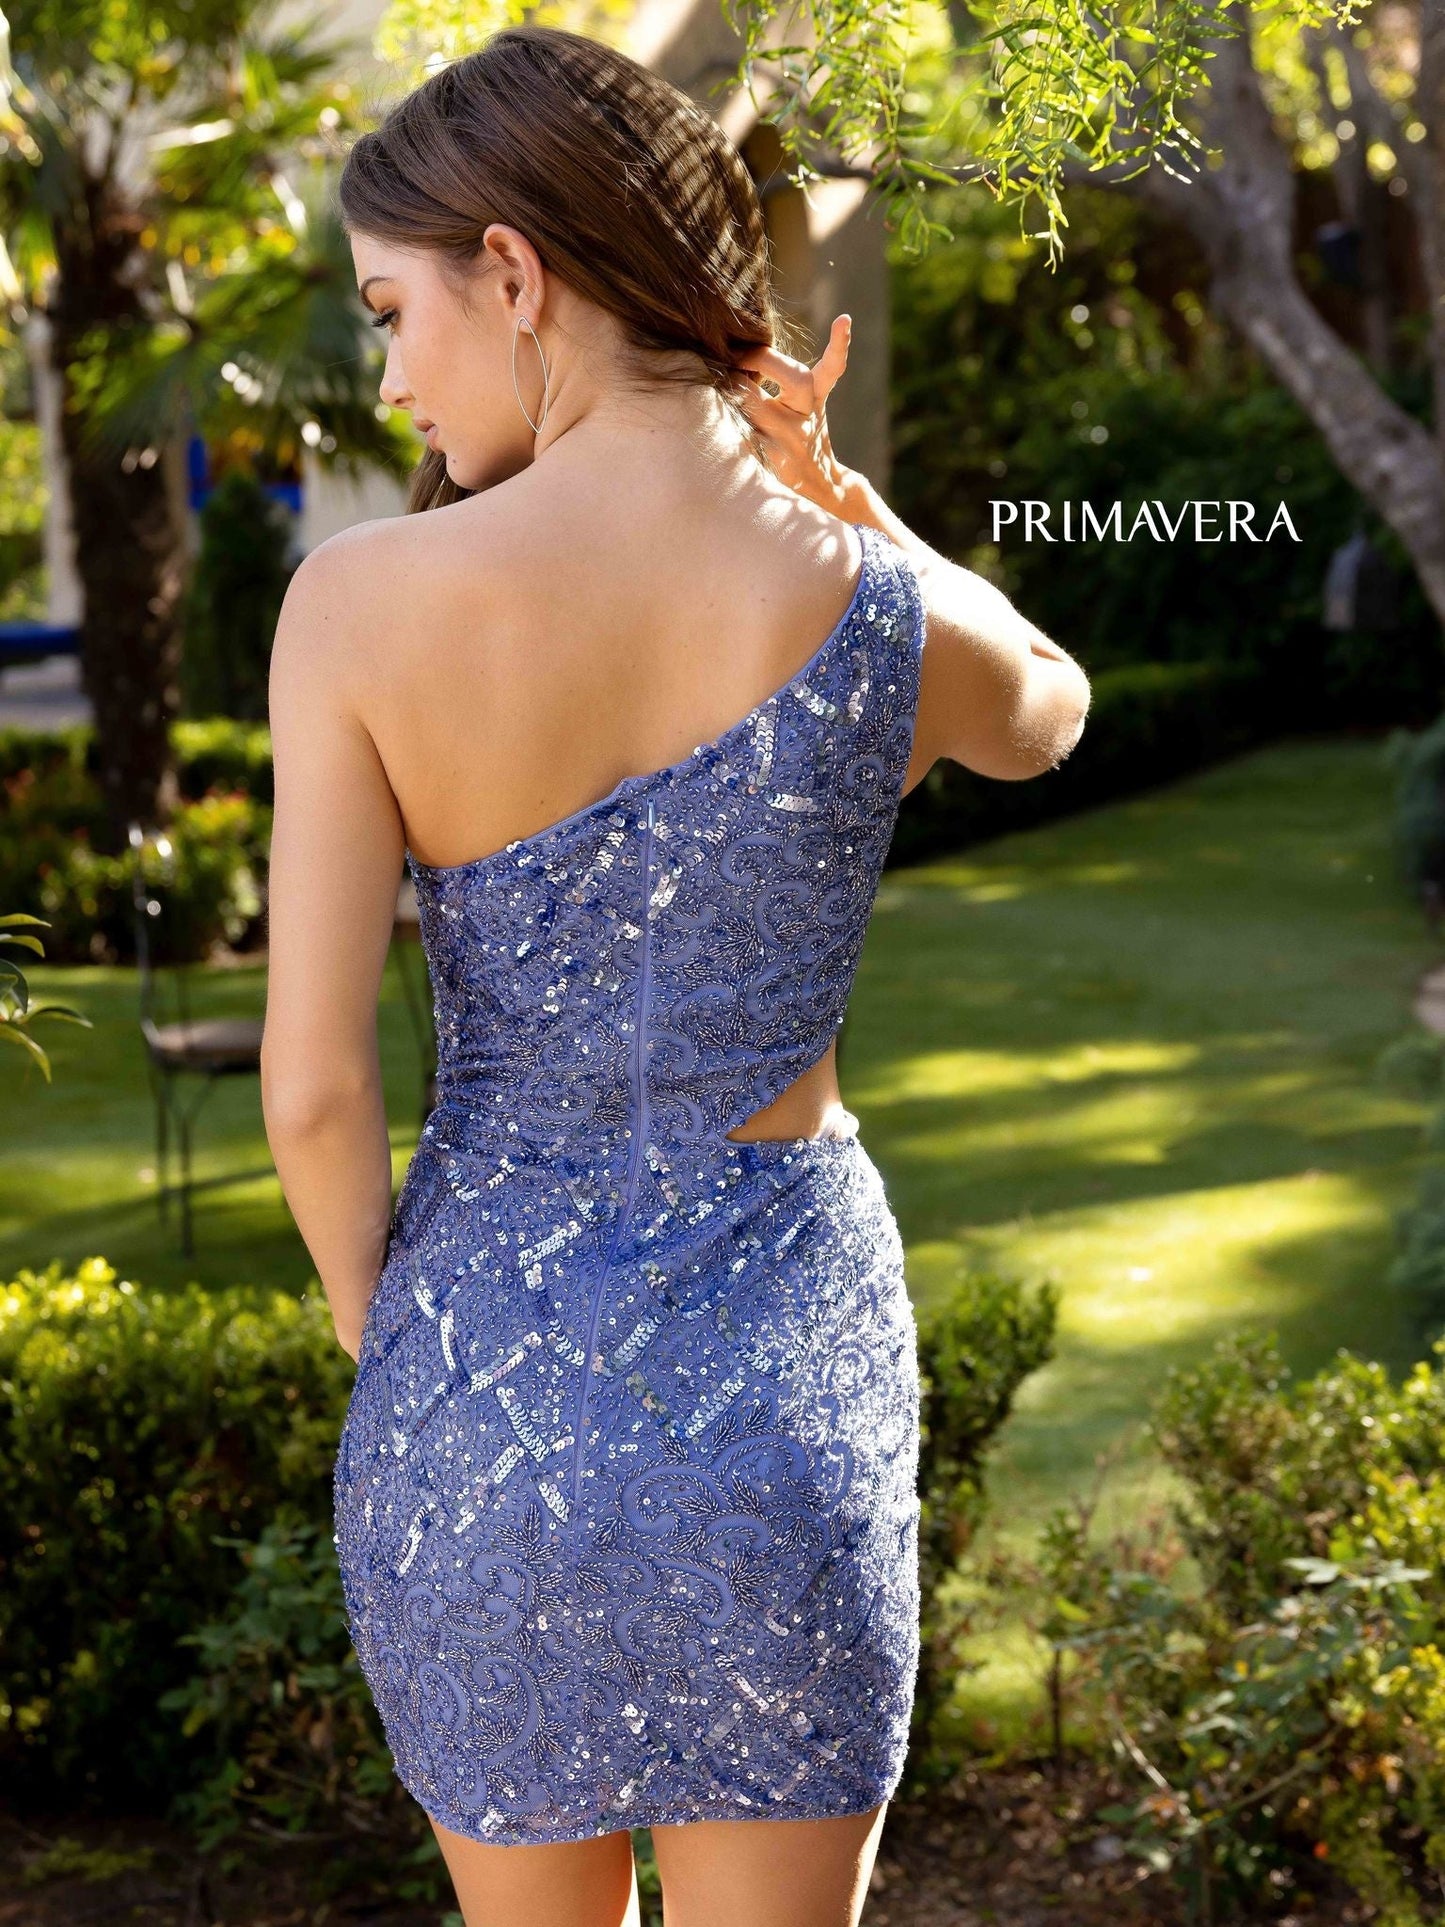 Primavera Couture 3504 Cocktail Dress Glass Slipper Formals Lake City Florida  Wow everyone at the party with this short homecoming dress.  The beaded sequins fitted dress has scallop details, it is one shoulder with a cutout on the side.  Colors: Black, Bright Blue, Ivory, Emerald, Gold, Light Turquoise, Neon Coral, Neon Lilac, Neon Pink, Orange, Pewter, Pink, Purple, Raspberry, Red, Royal Blue, Sage Green, Yellow  Sizes:  00, 0, 2, 4, 6, 8, 10, 12, 14, 16, 18